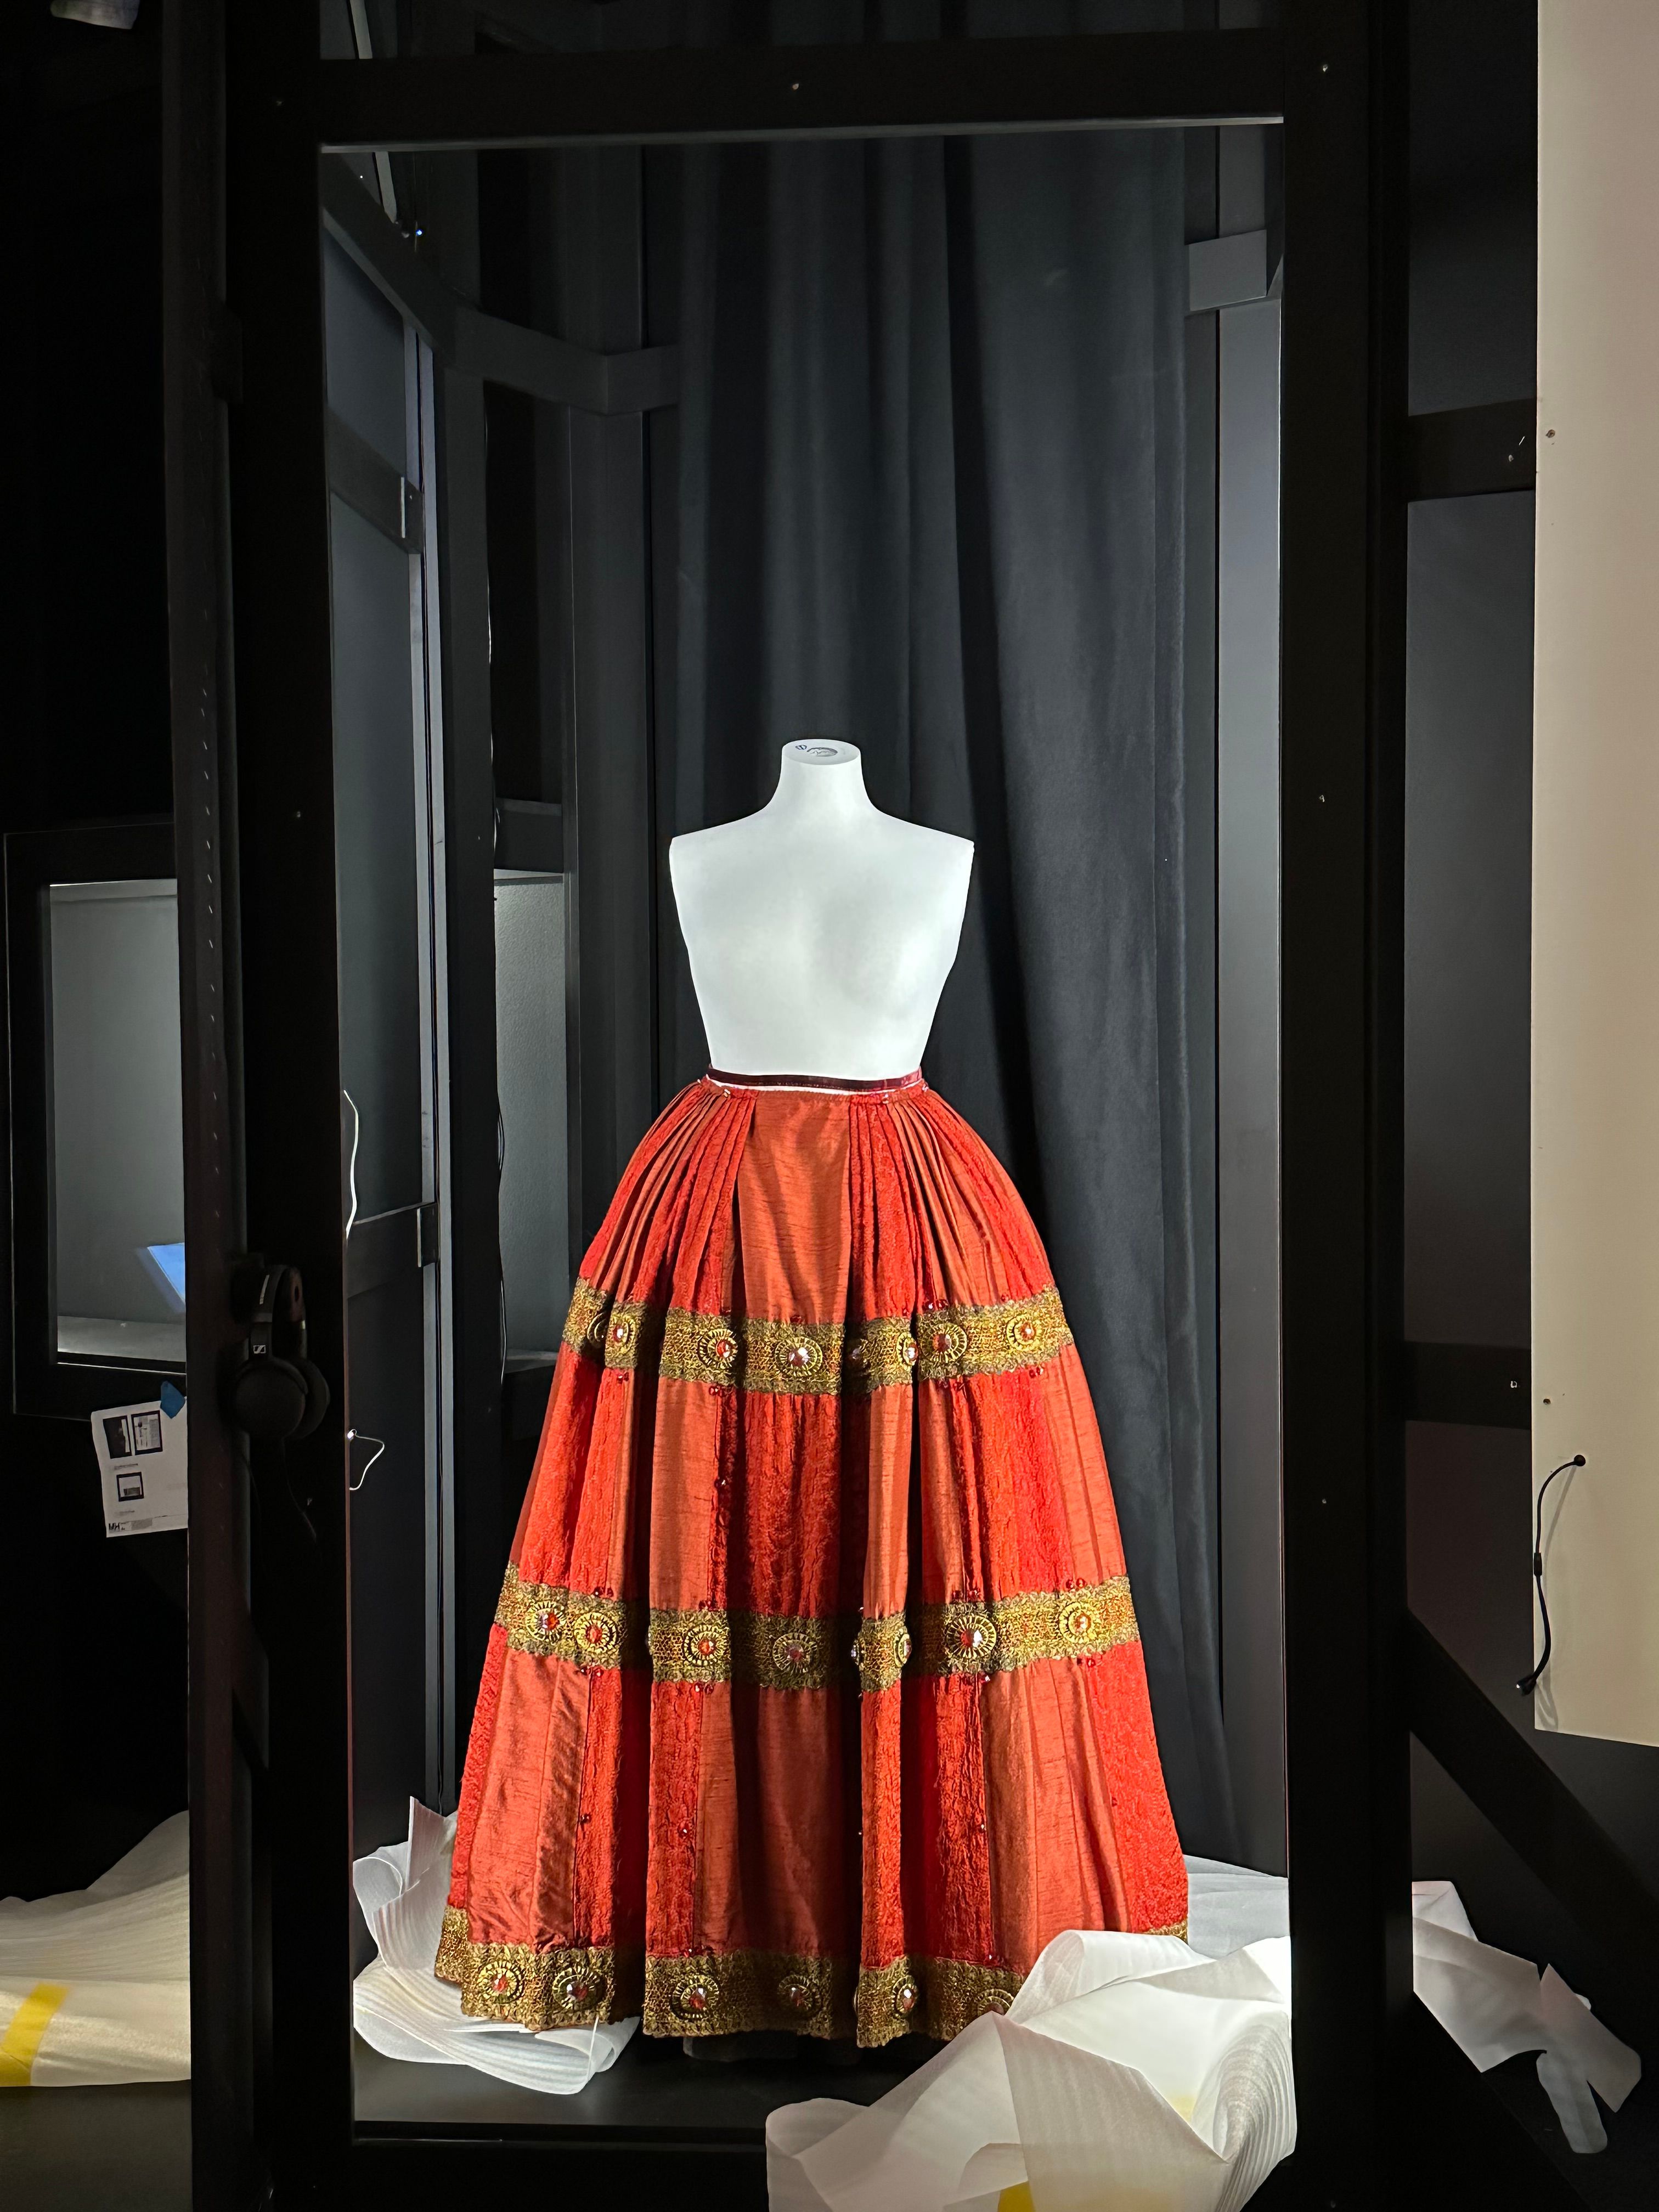 An elaborate full-bodied skirt in red material, with three horizontal bands of gold braid, has been placed on a plain white mannequin which does not yet have its arms or head attached.   